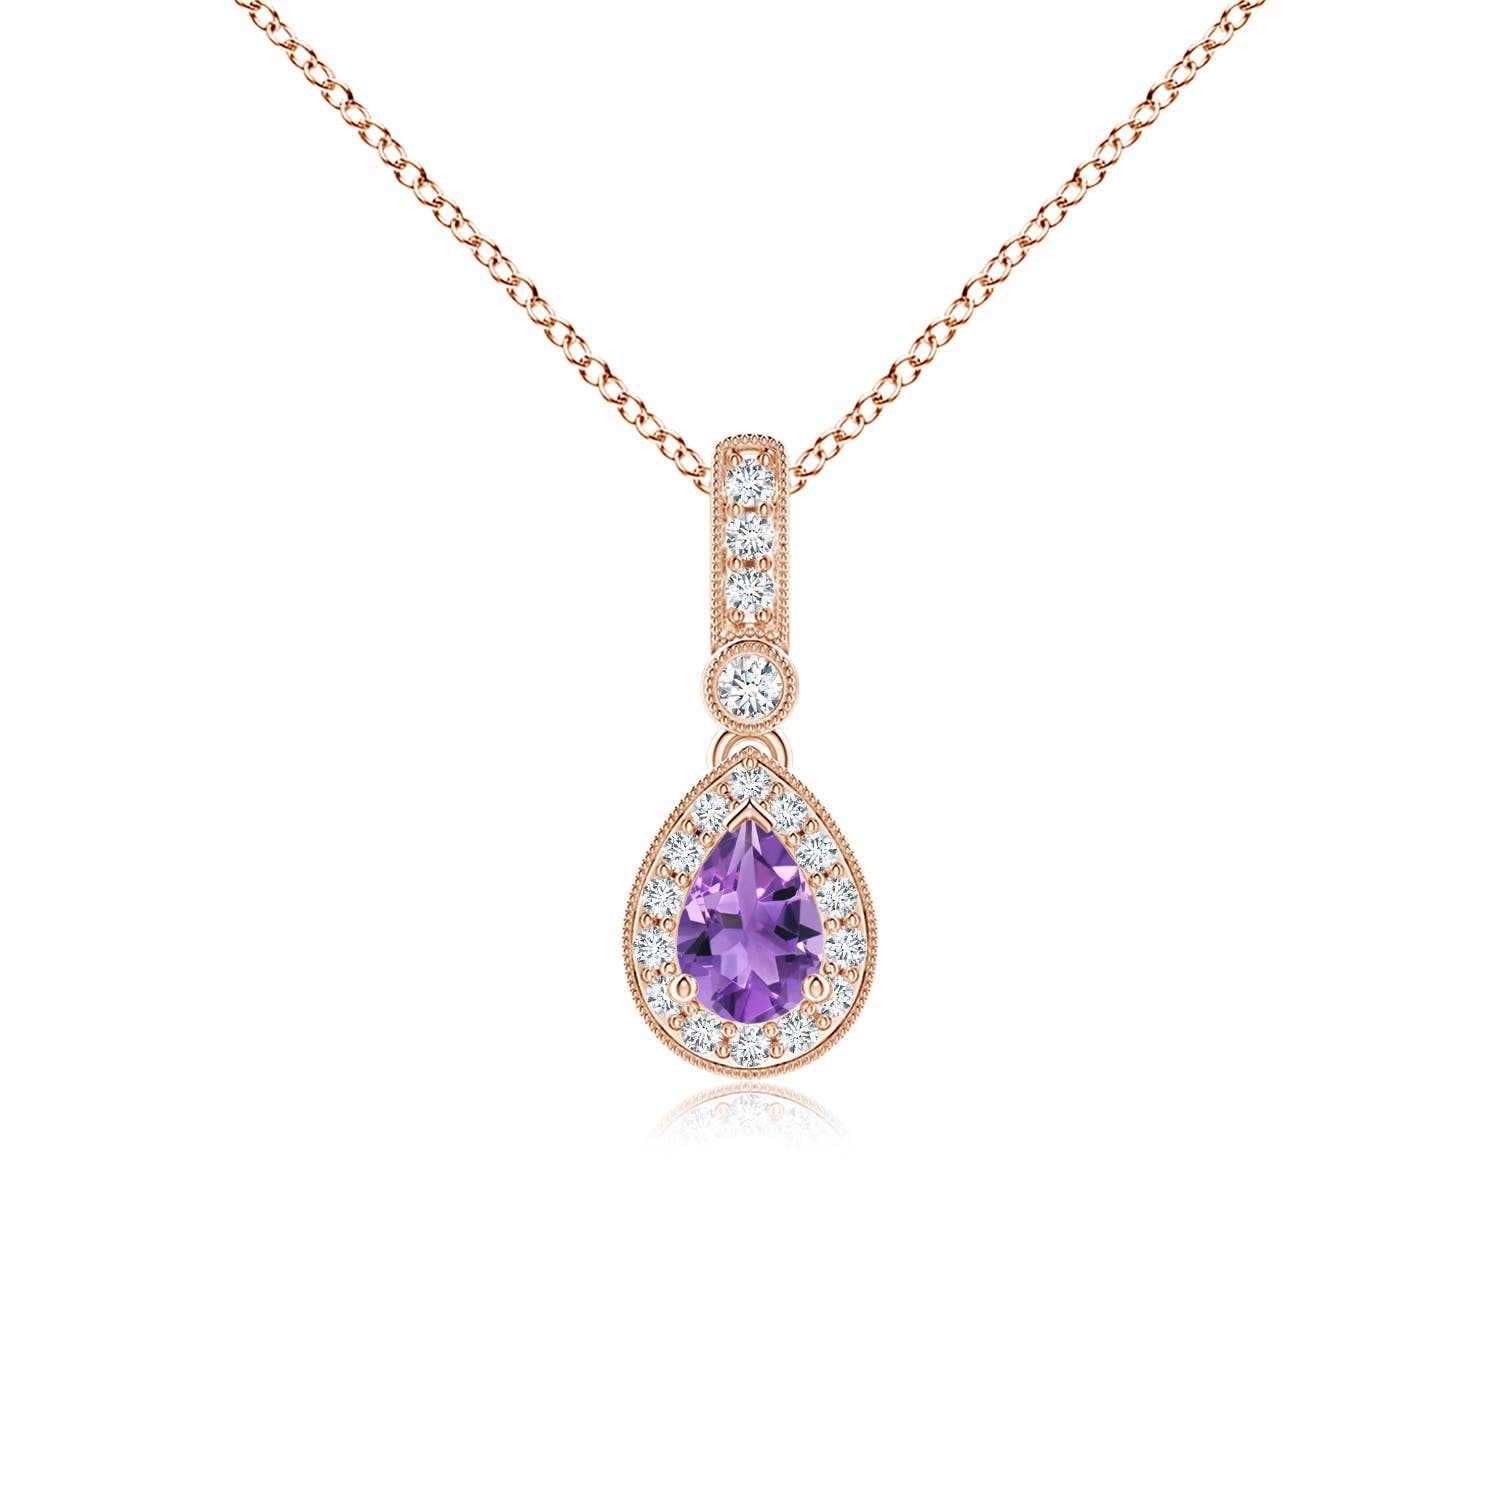 AA - Amethyst / 0.51 CT / 14 KT Rose Gold